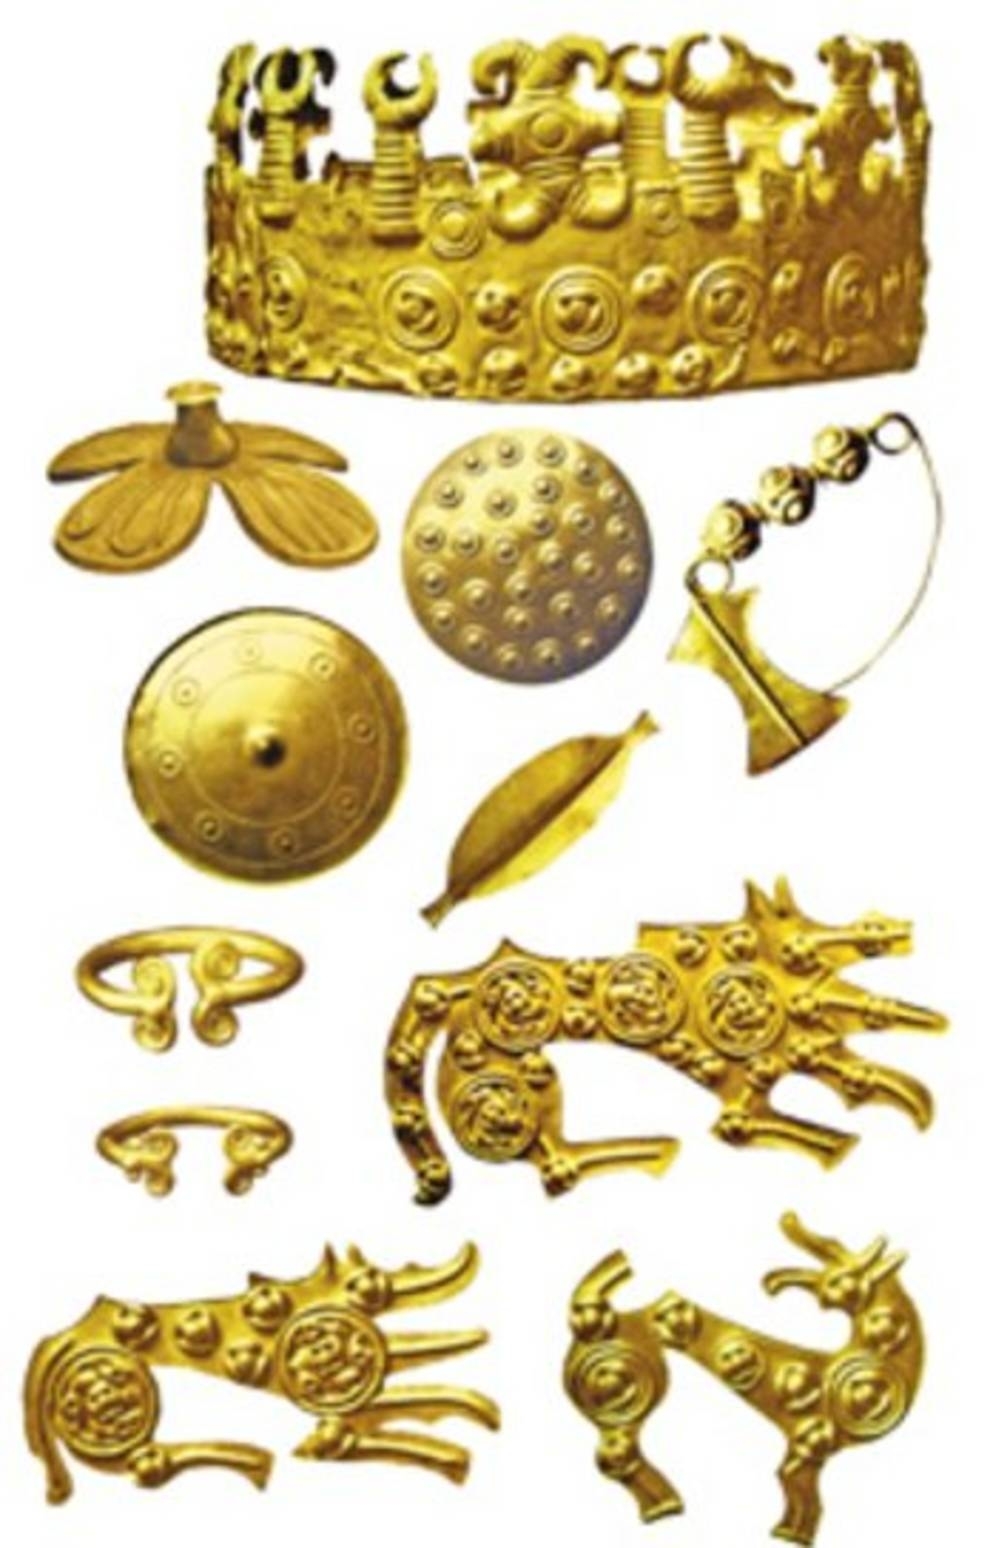 Ancient treasure of gold jewelry found in the Ternopil region